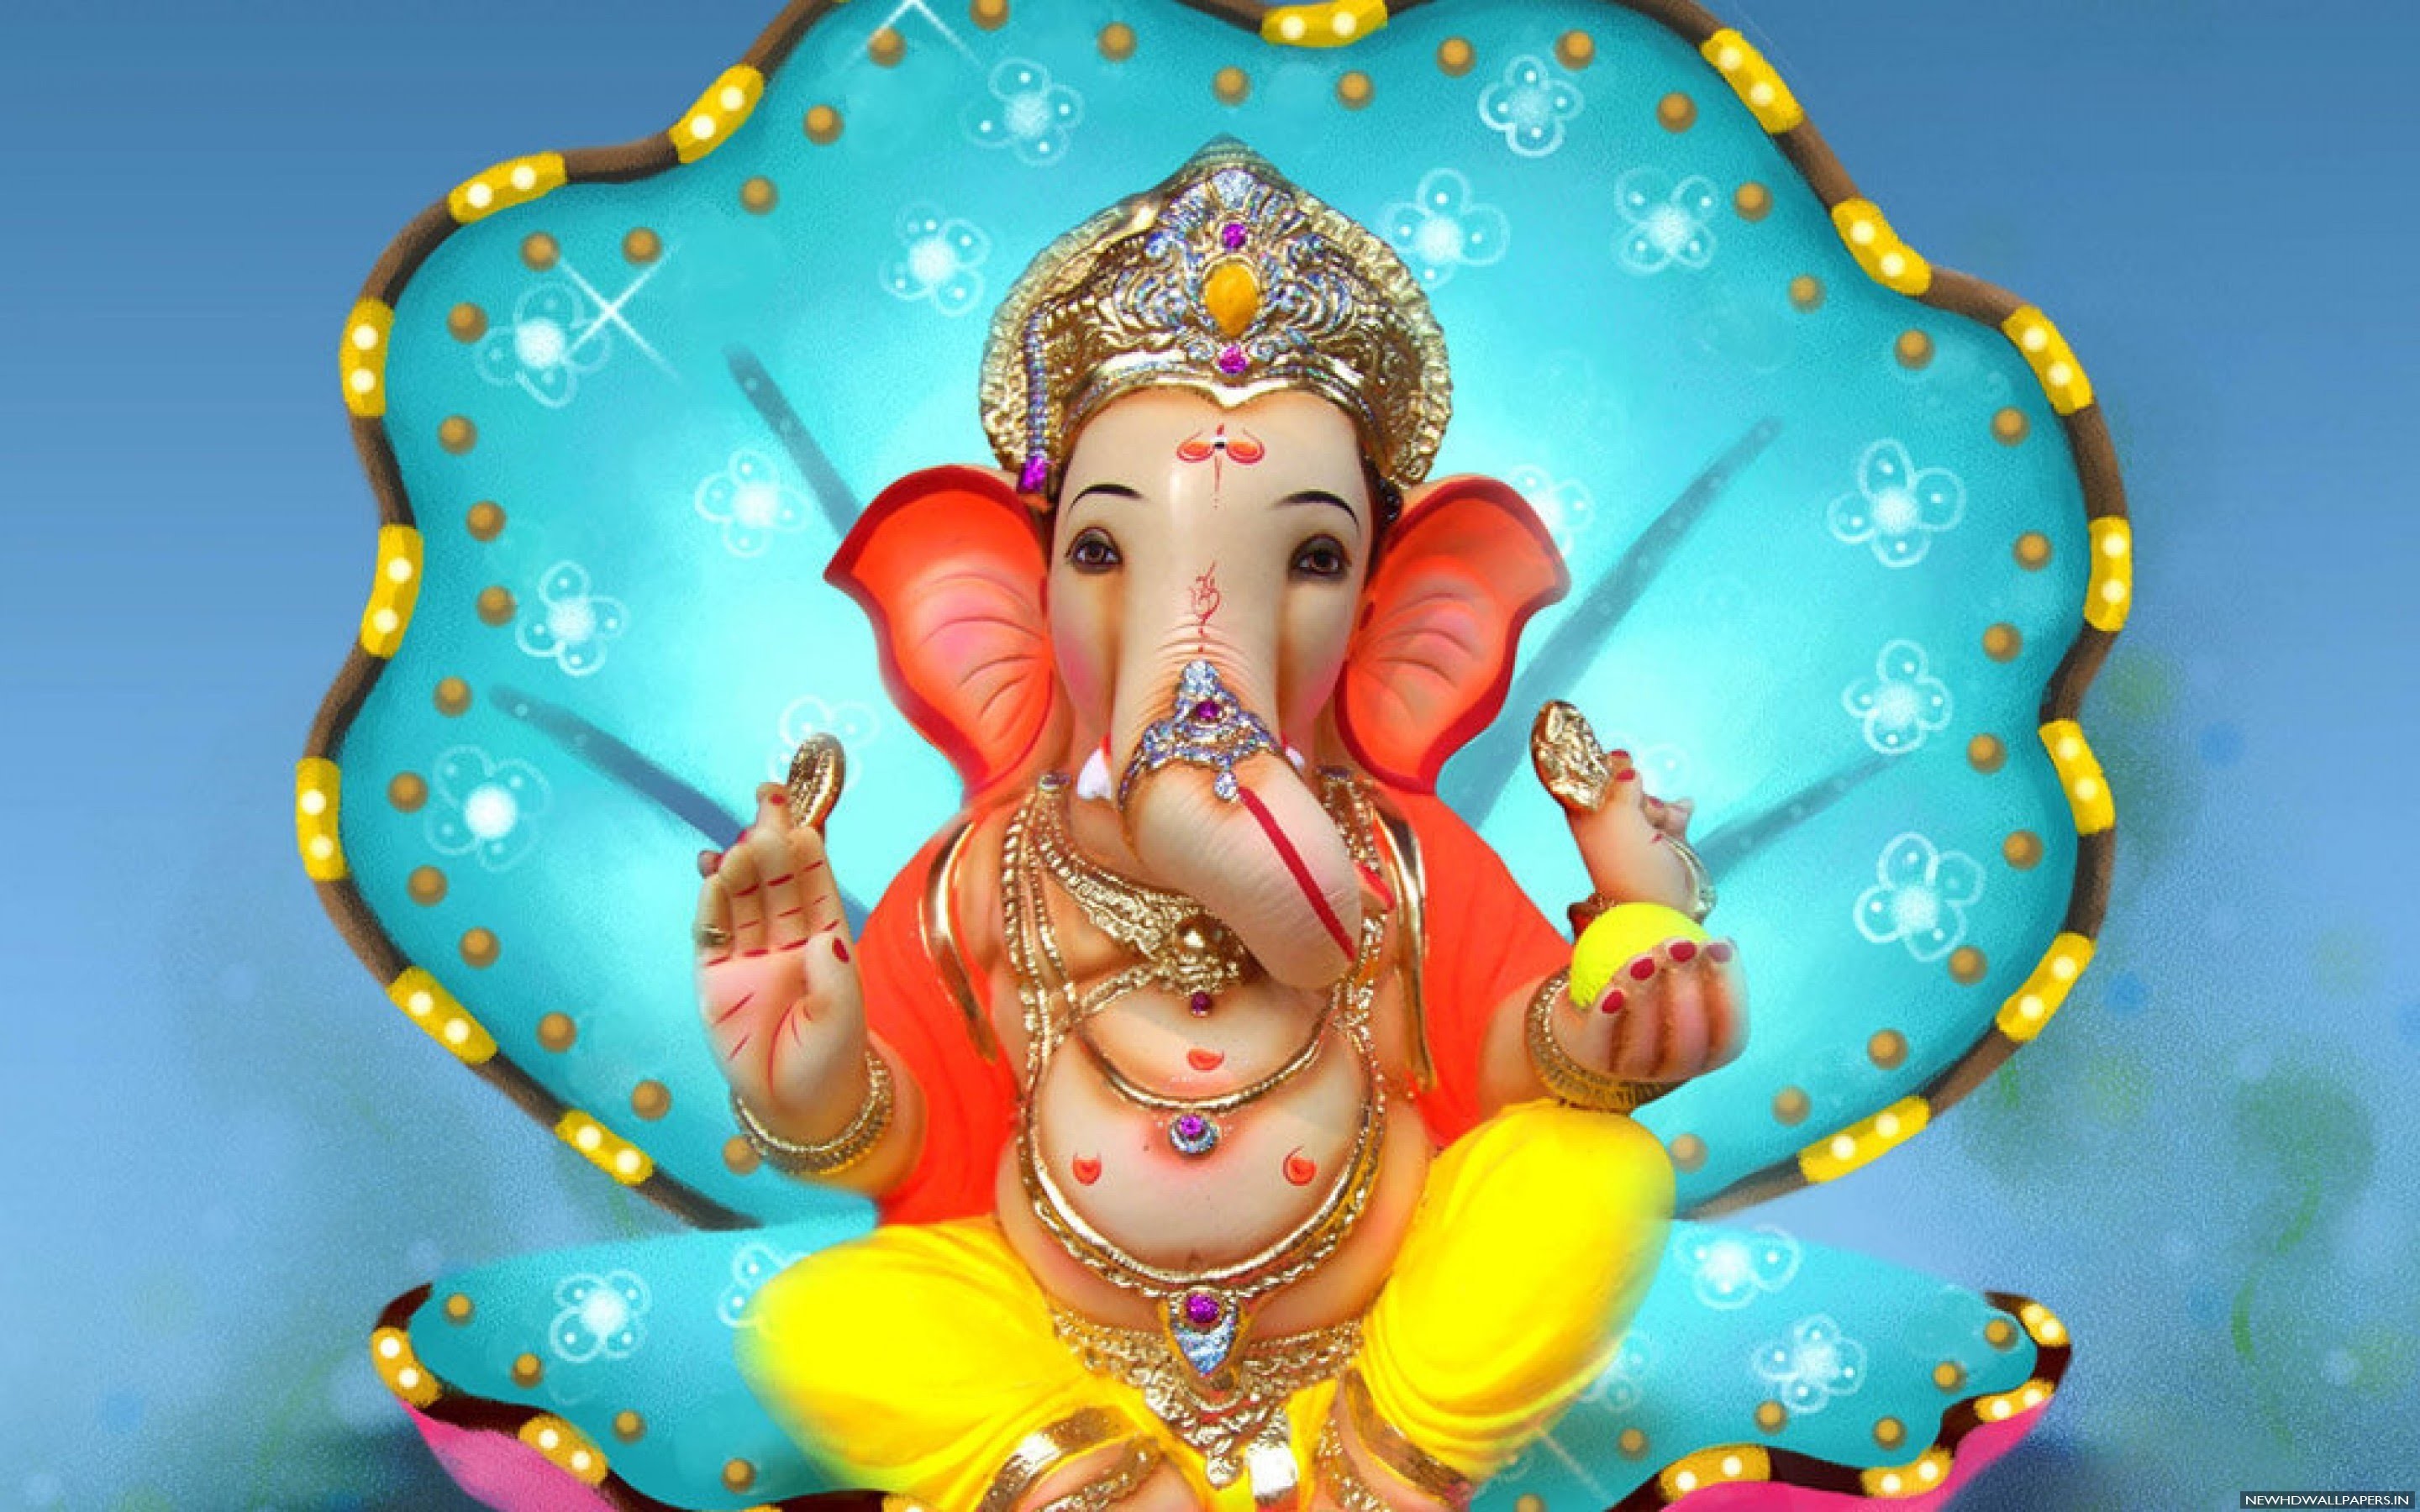 Lord Ganesha worshipped before the beginning of every festive occasion and most worshiped deities in Hindu